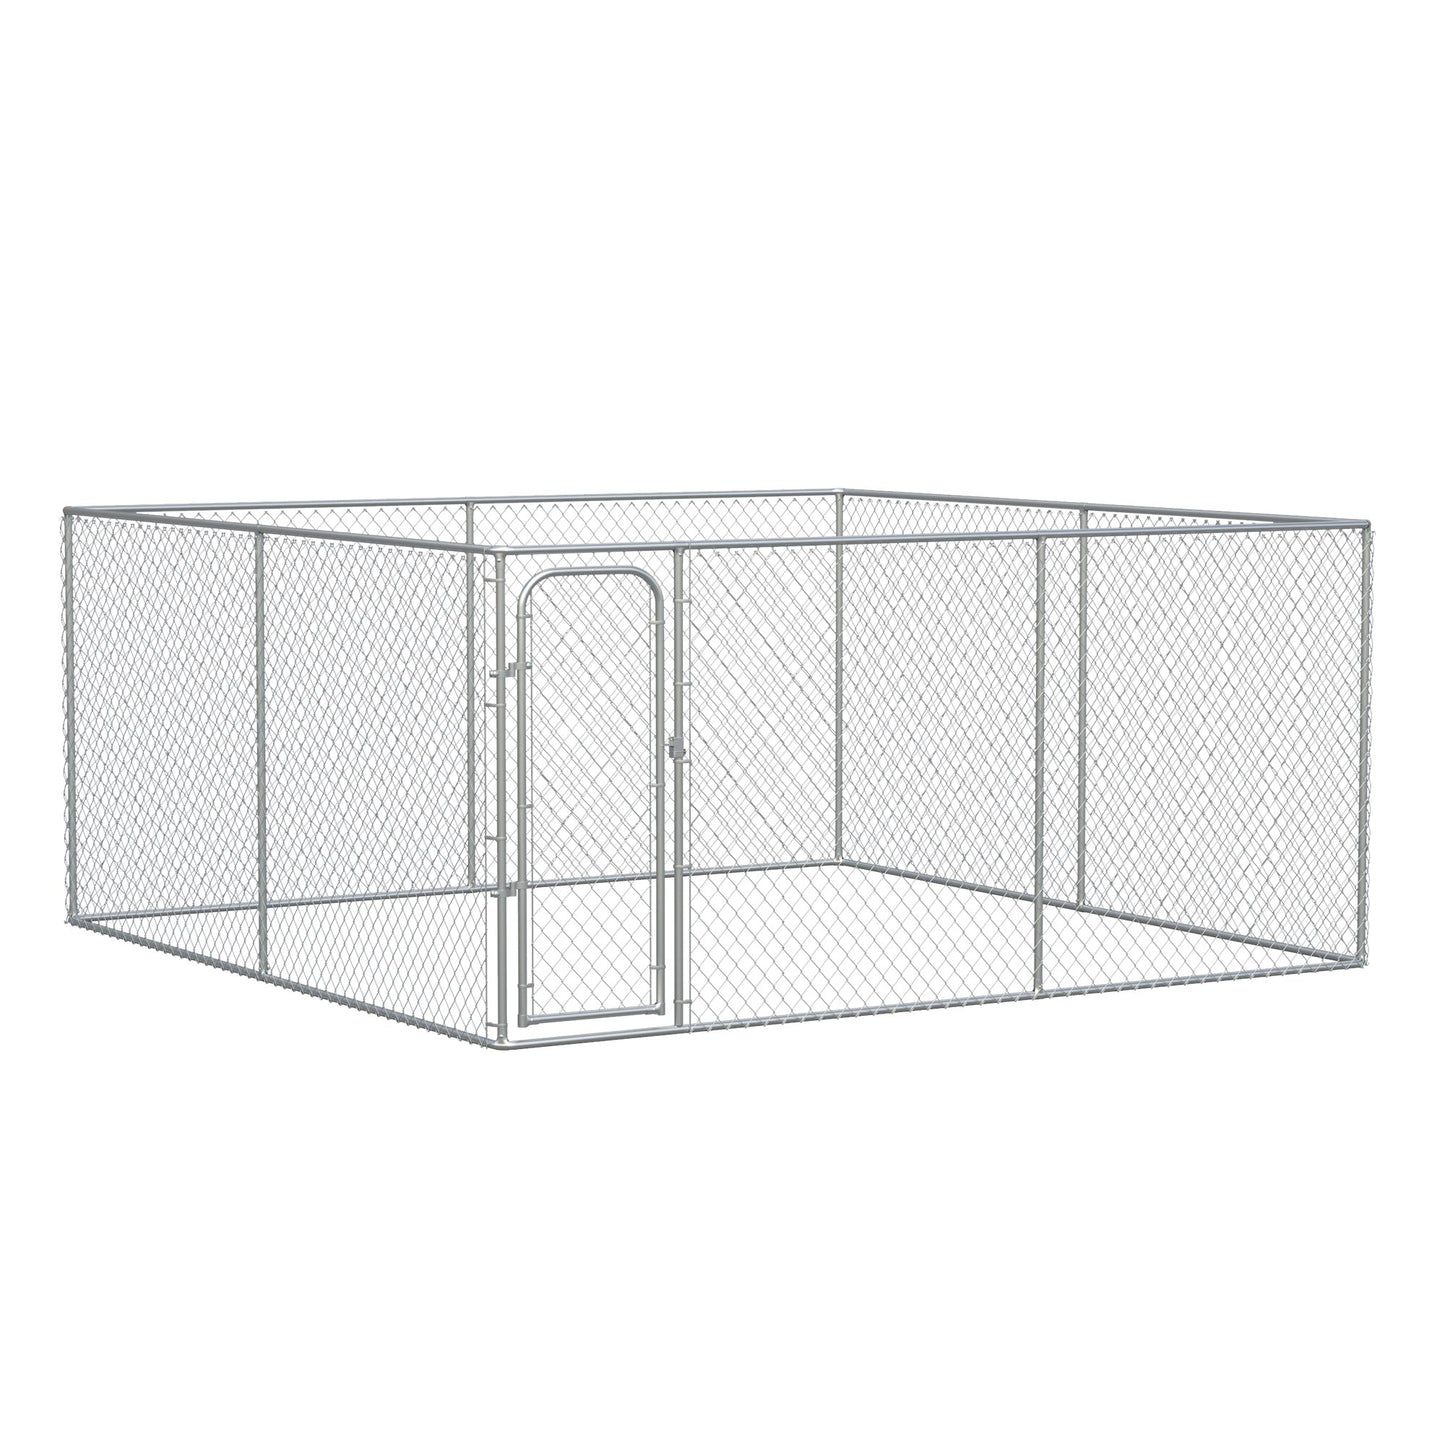 Outdoor and Garden-Outdoor Dog Kennel Galvanized Chain Link Fence Heavy Duty Pet Run House Chicken Coop with Secure Lock Mesh Sidewalls for Backyard, Silver - Outdoor Style Company